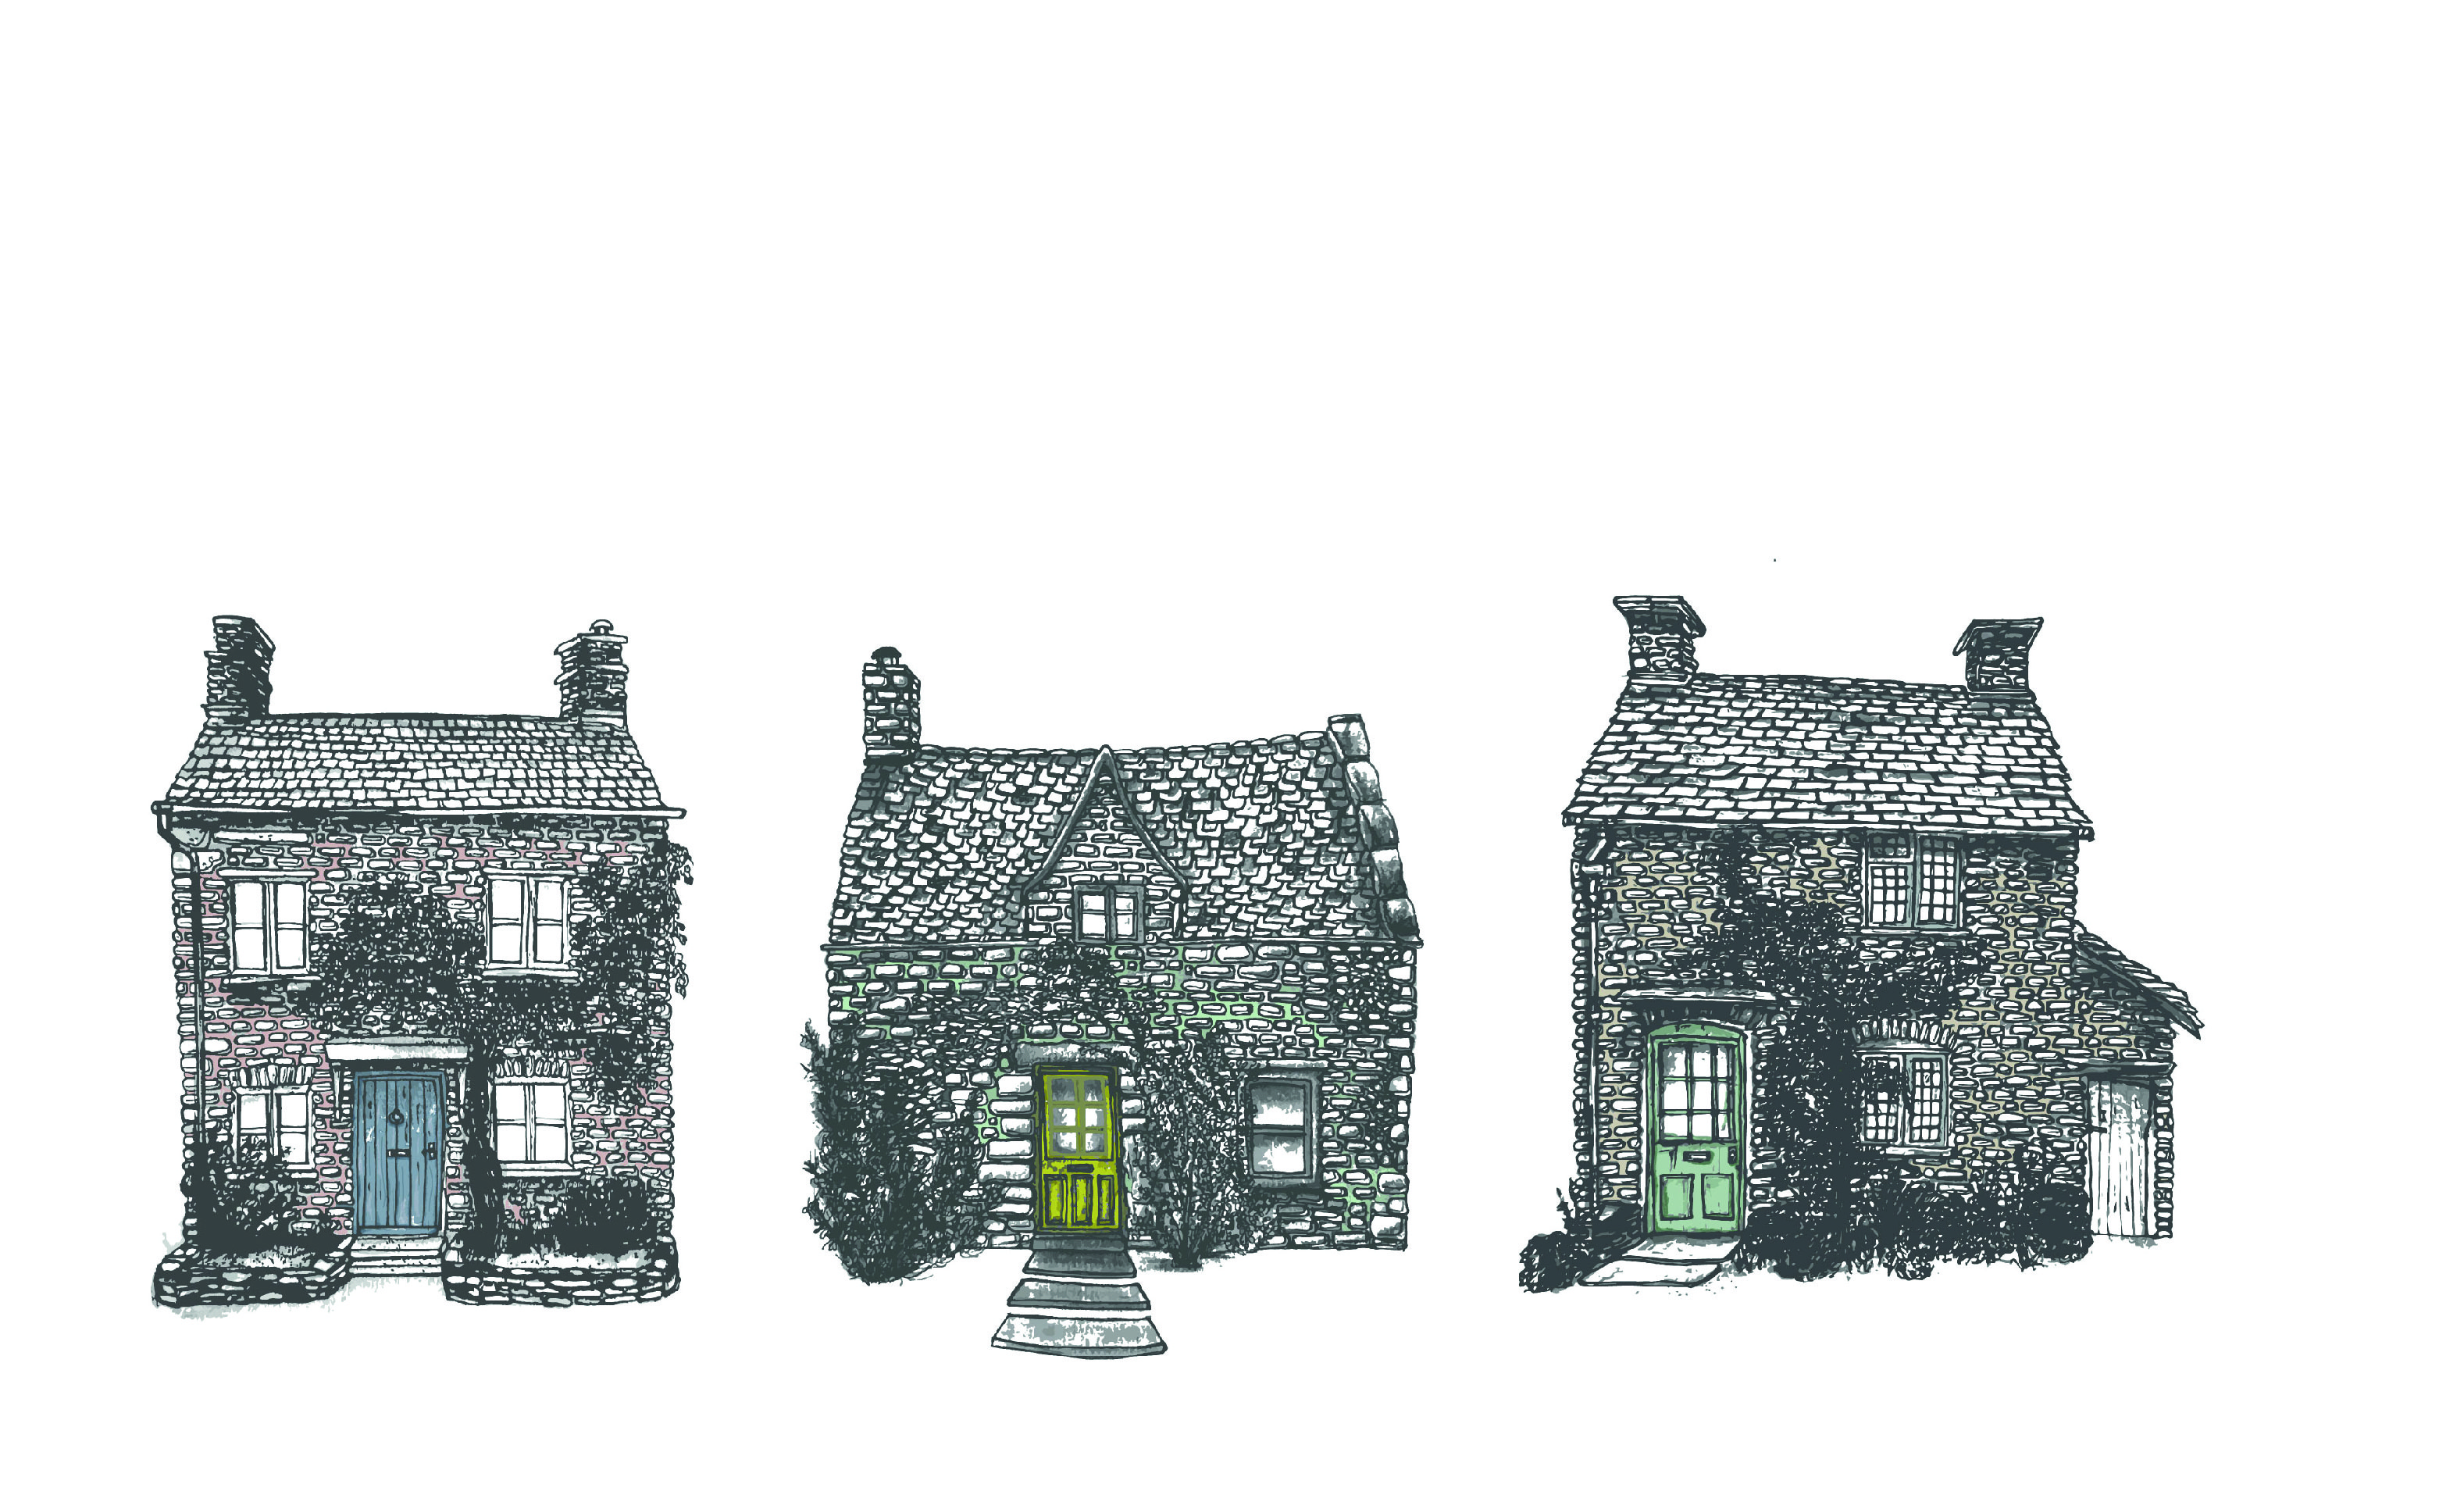 Cottage illustrations drawn with pencil and ink